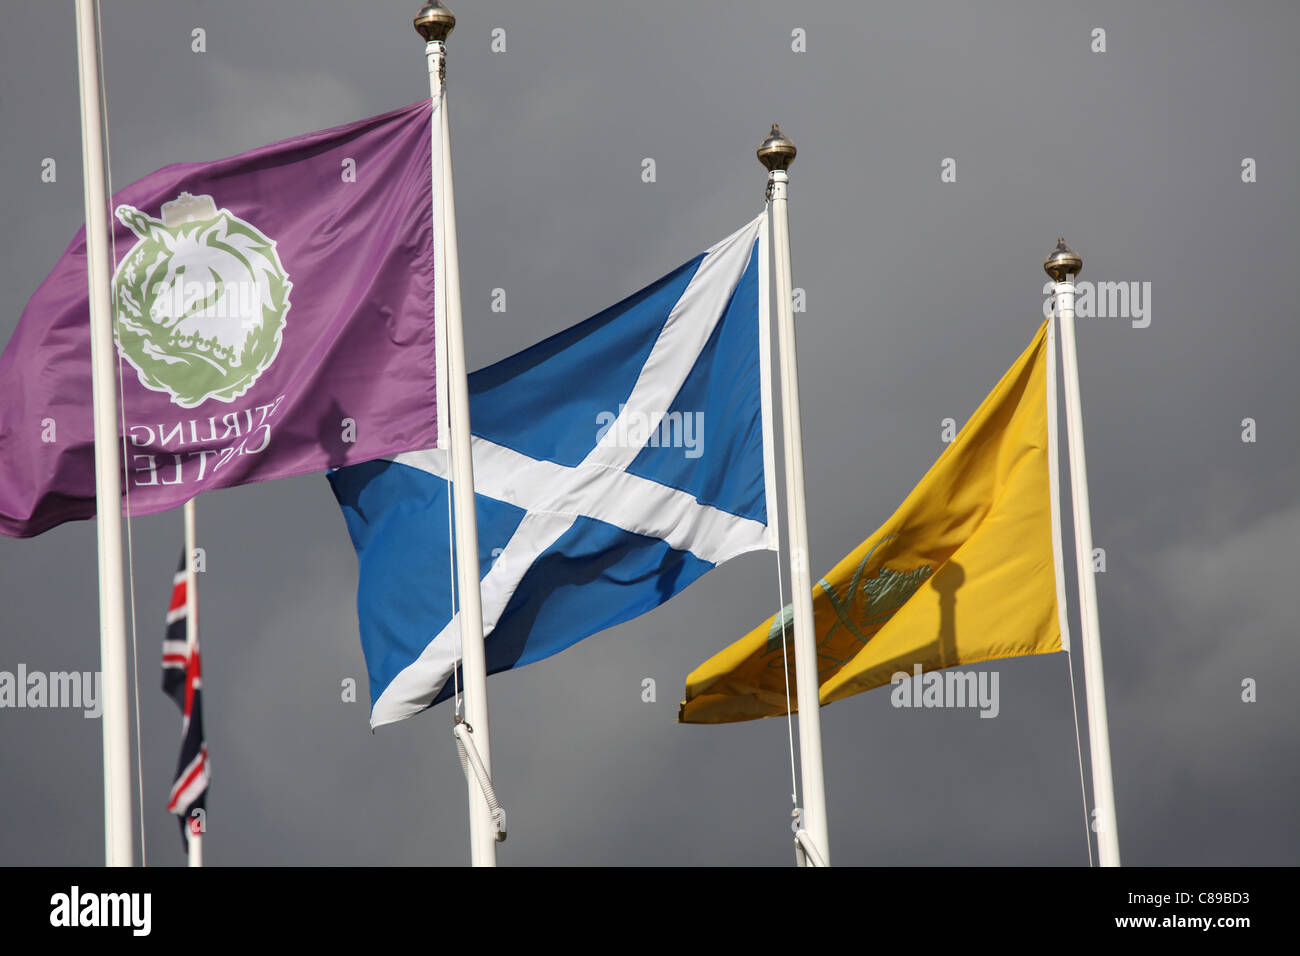 City of Stirling, Scotland. Flags flying above Stirling Castle. Stock Photo